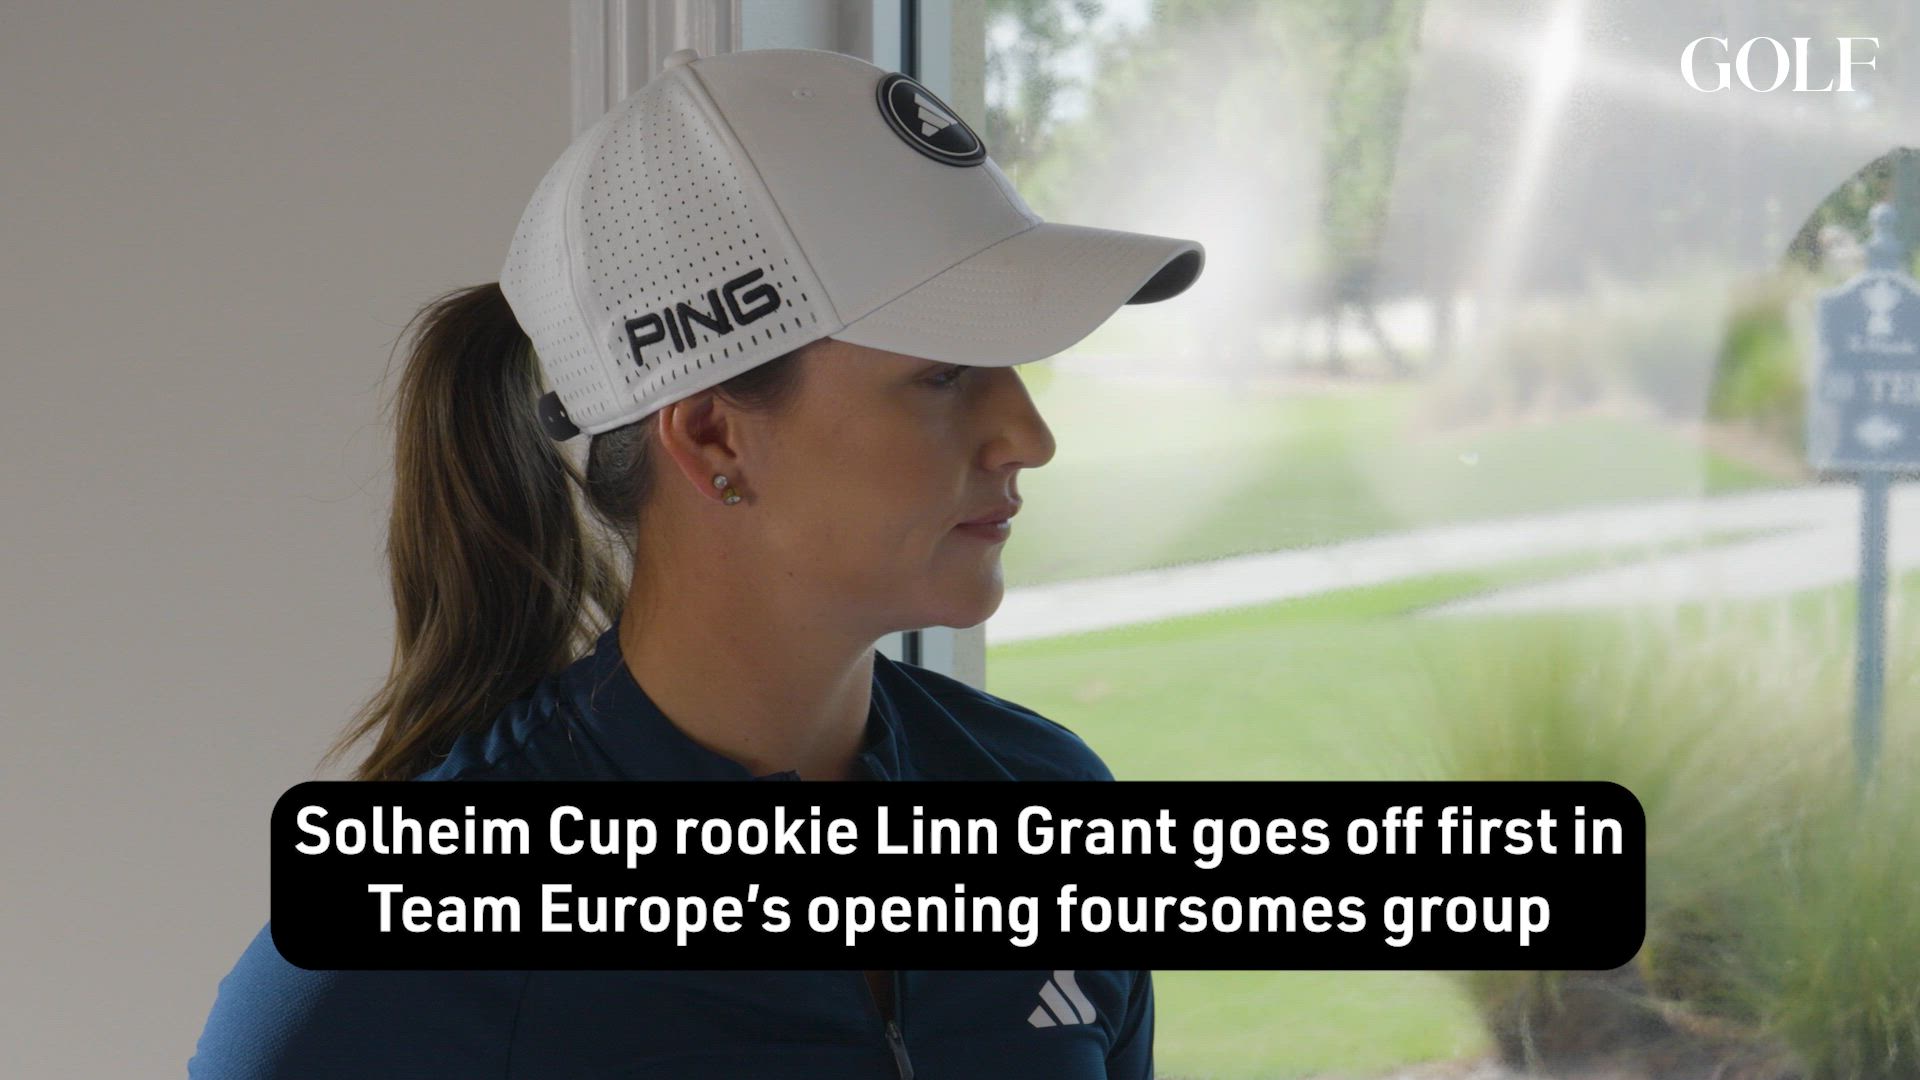 1-on-1 with Solheim Cup rookie Linn Grant